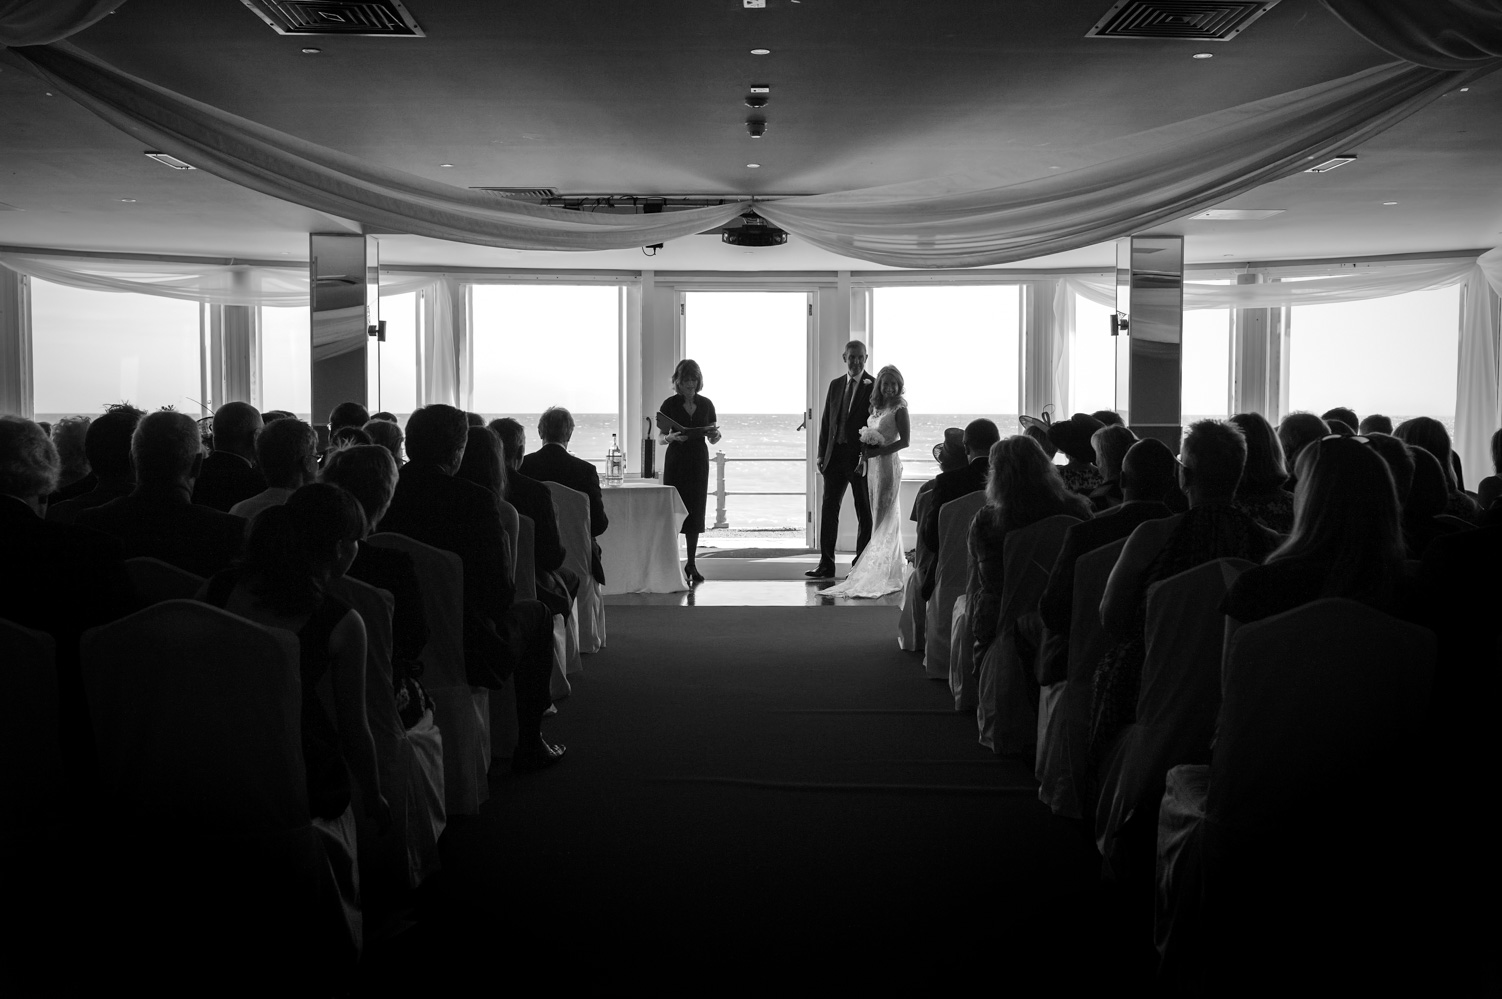 Wedding ceremony at the Azur Hastings by informal Sussex wedding photographer James Robertshaw